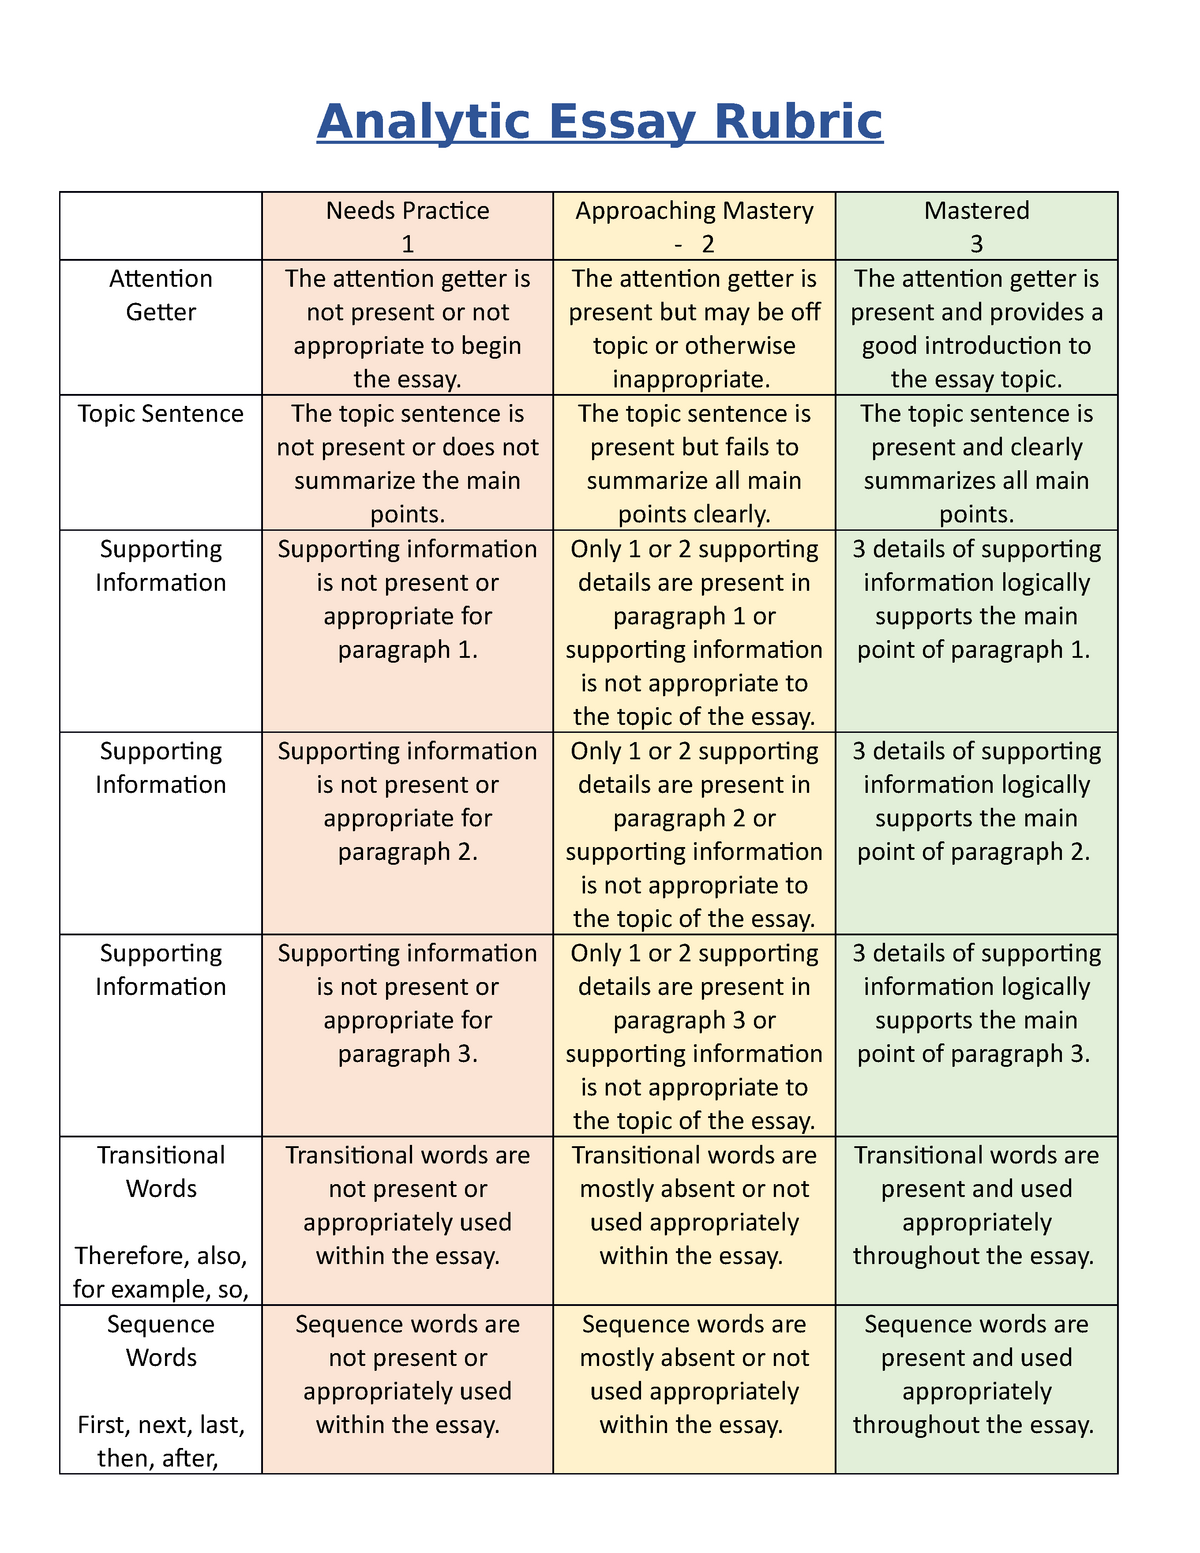 analytic rubric for writing essay